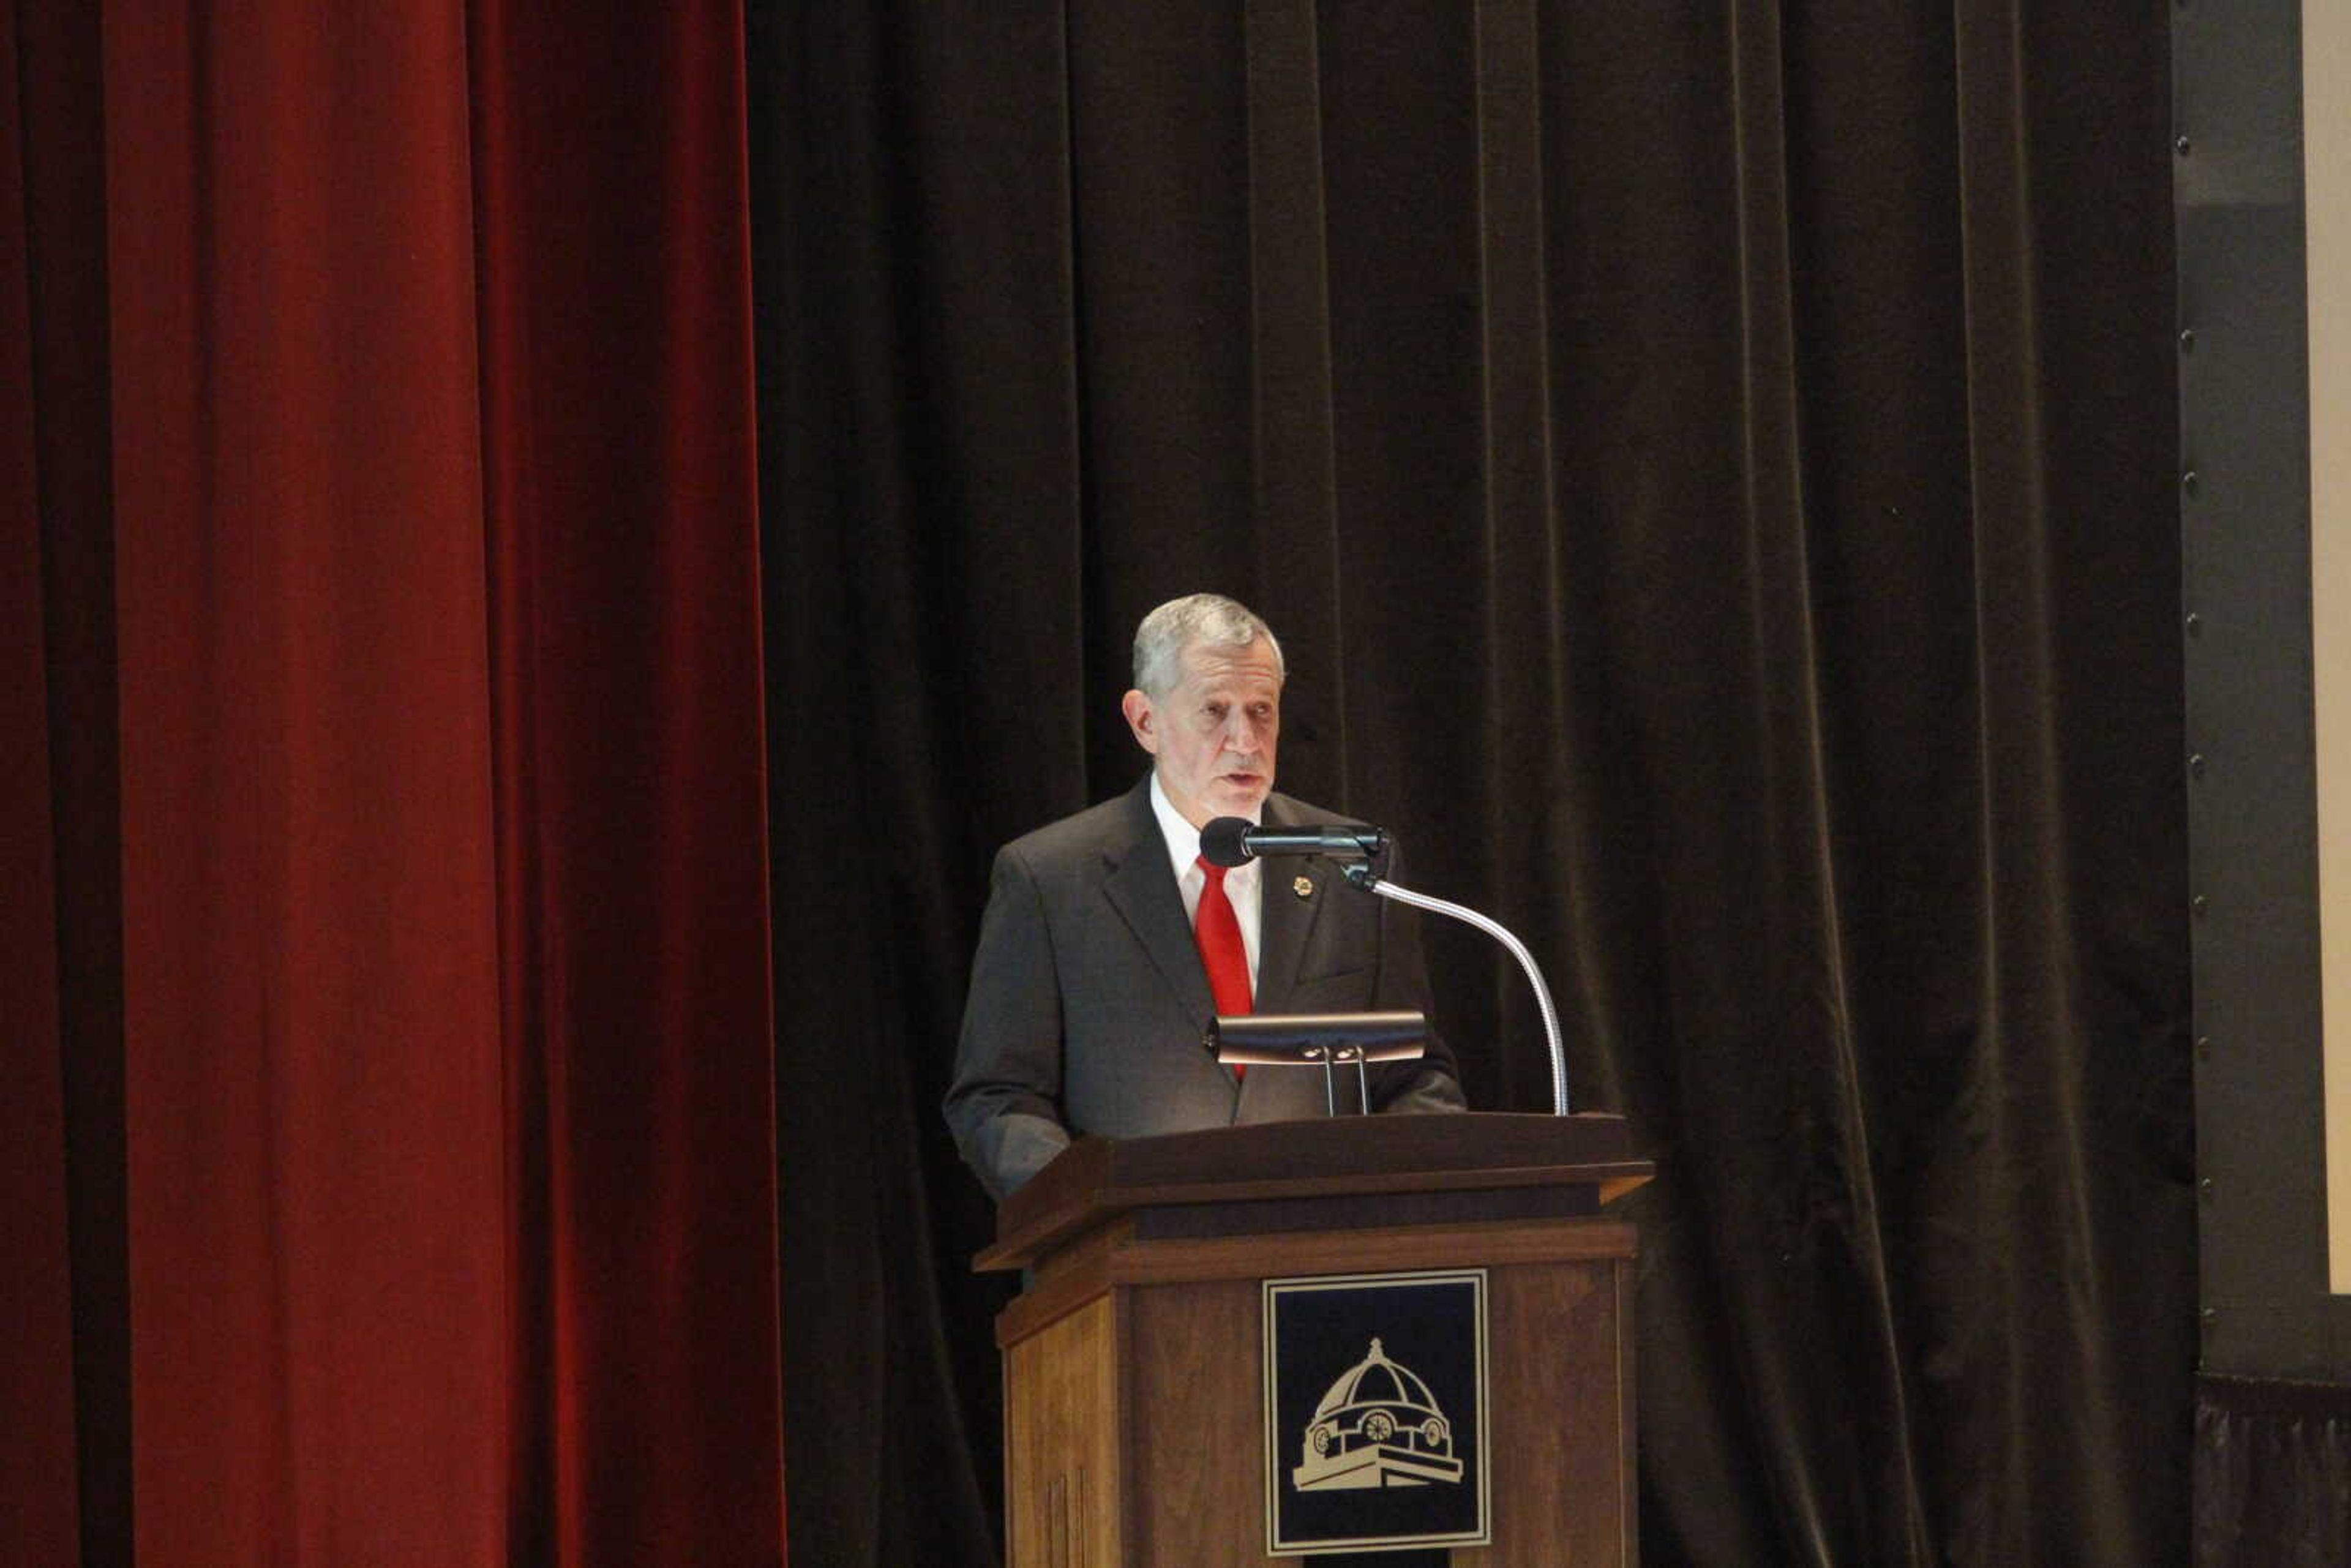 President Vargas delivers annual update on State of the University to employees